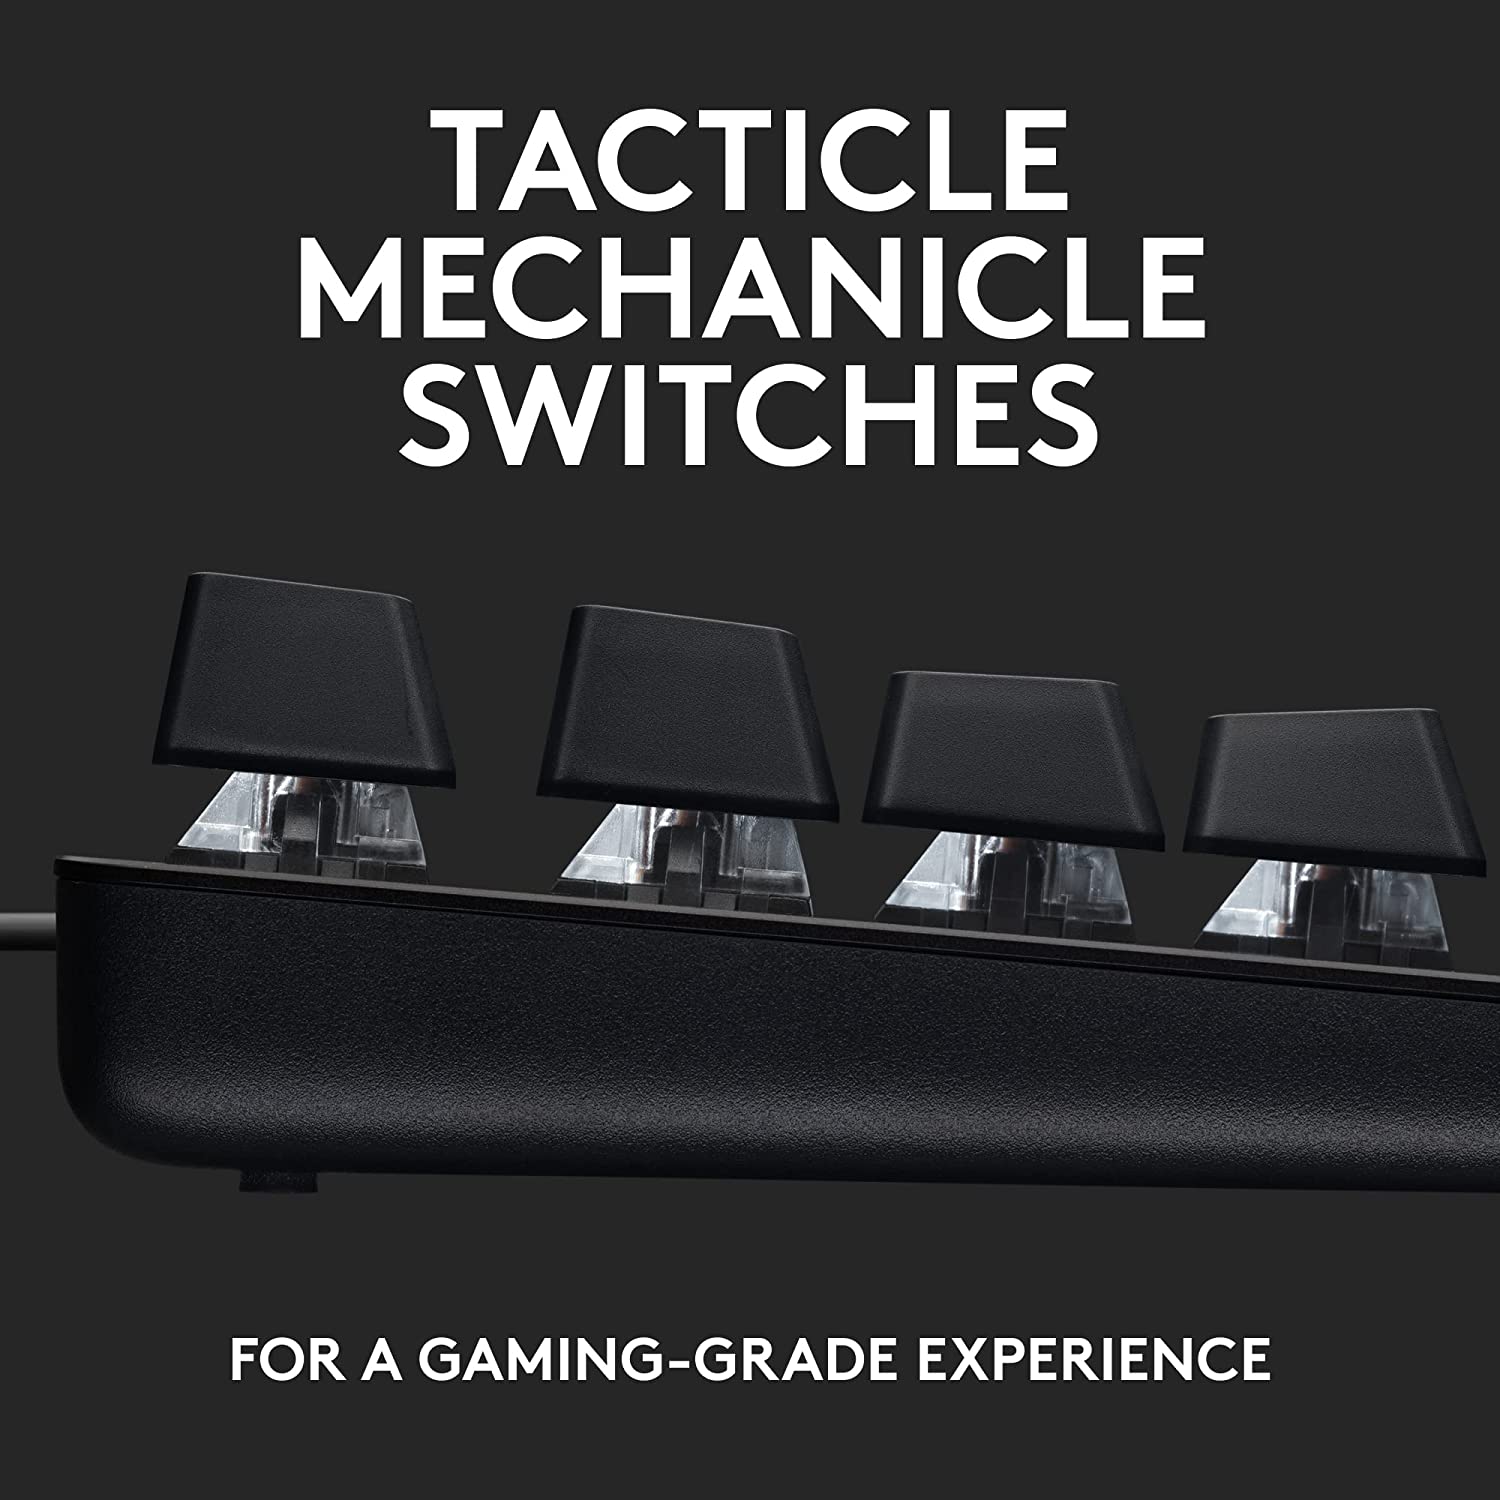 Logitech G launches G413 SE Mechanical Gaming Keyboard in Full Size and TKL Versions start at ₹5,995